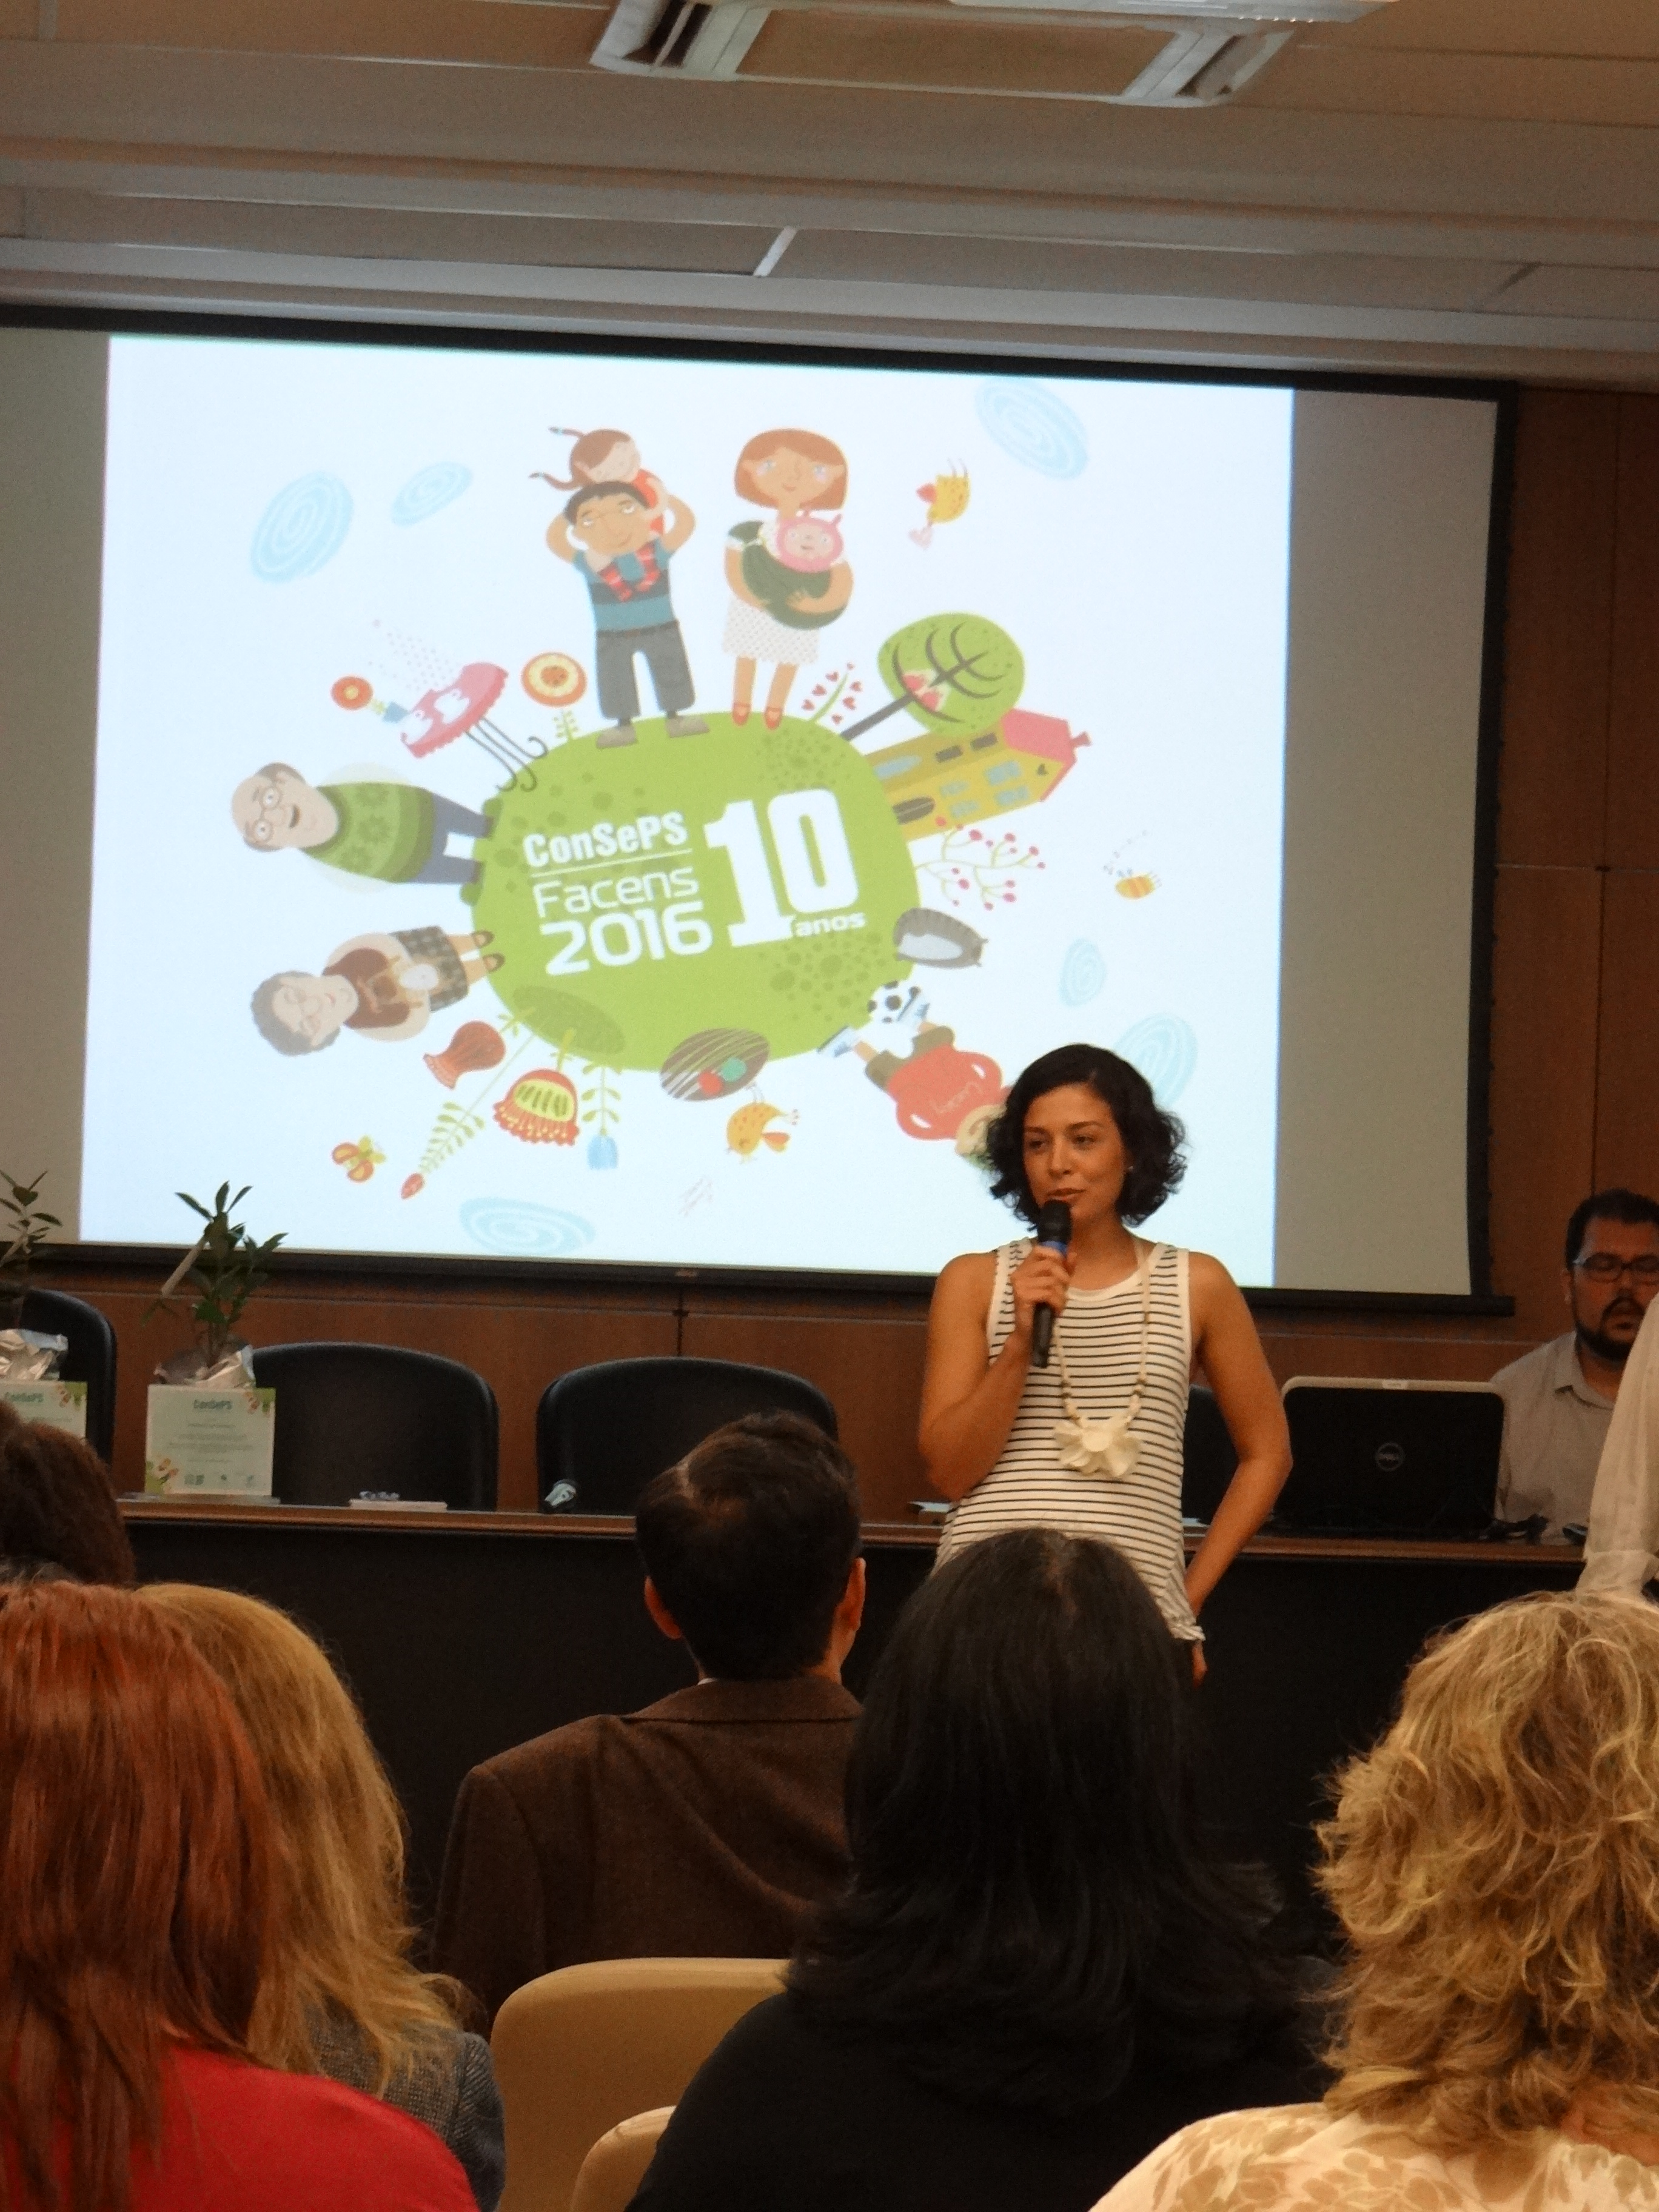 Conseps 2016 – 10 anos